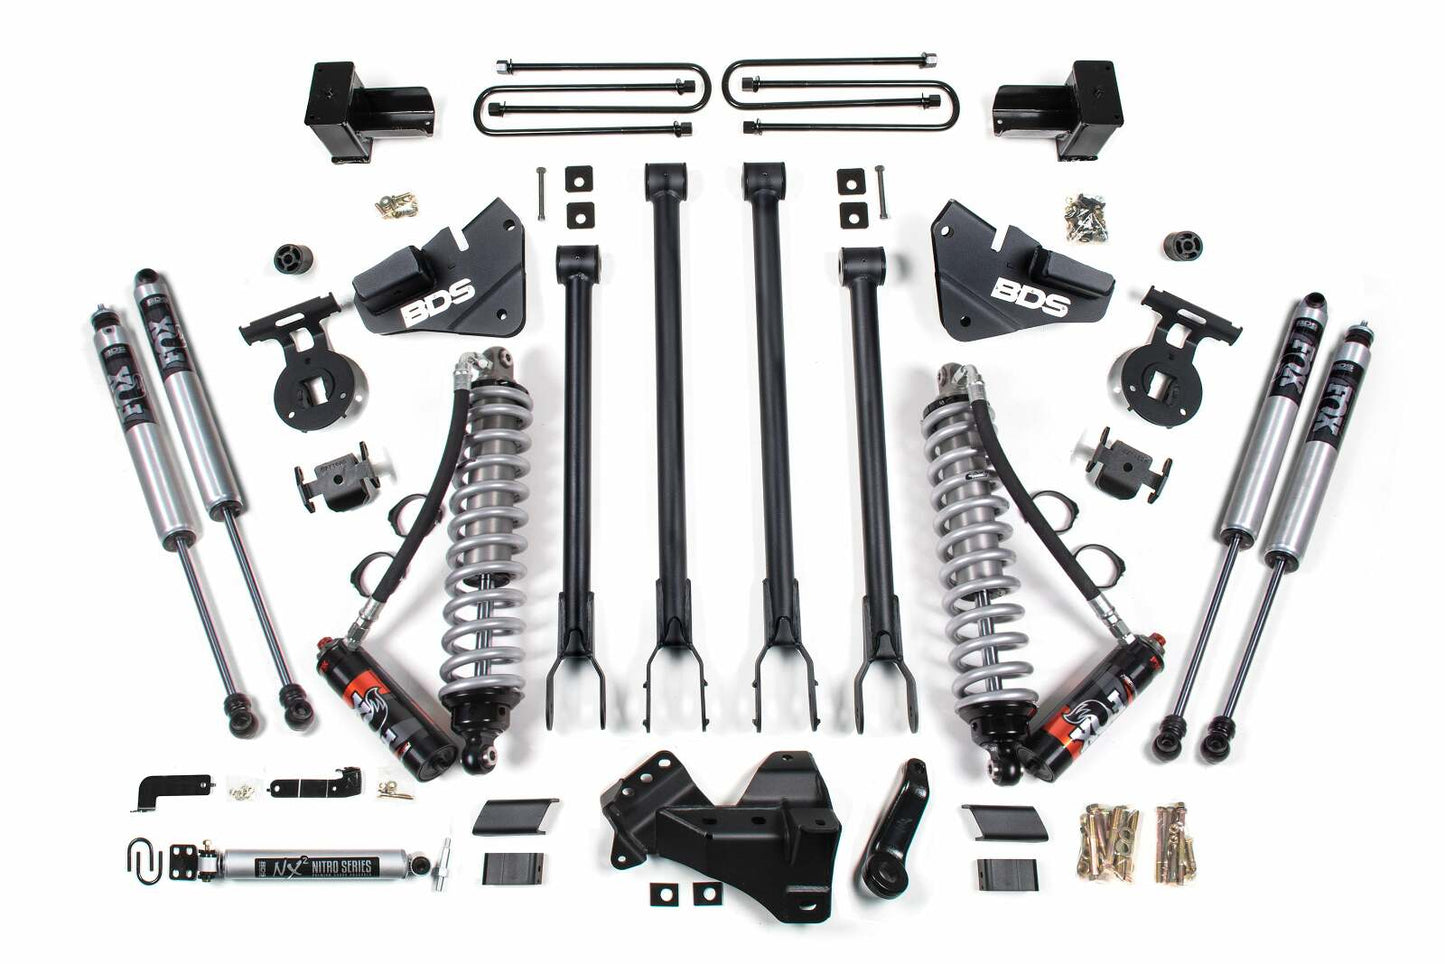 2017-2019 Ford F350 Dually 4wd 4" 4-Link Suspension Lift Kit, 3" Rear, Block, Diesel - Fox 2.5 PES C/O Front, Fox 2.0 IFP PS Aux Front, Fox 2.0 IFP PS Rear